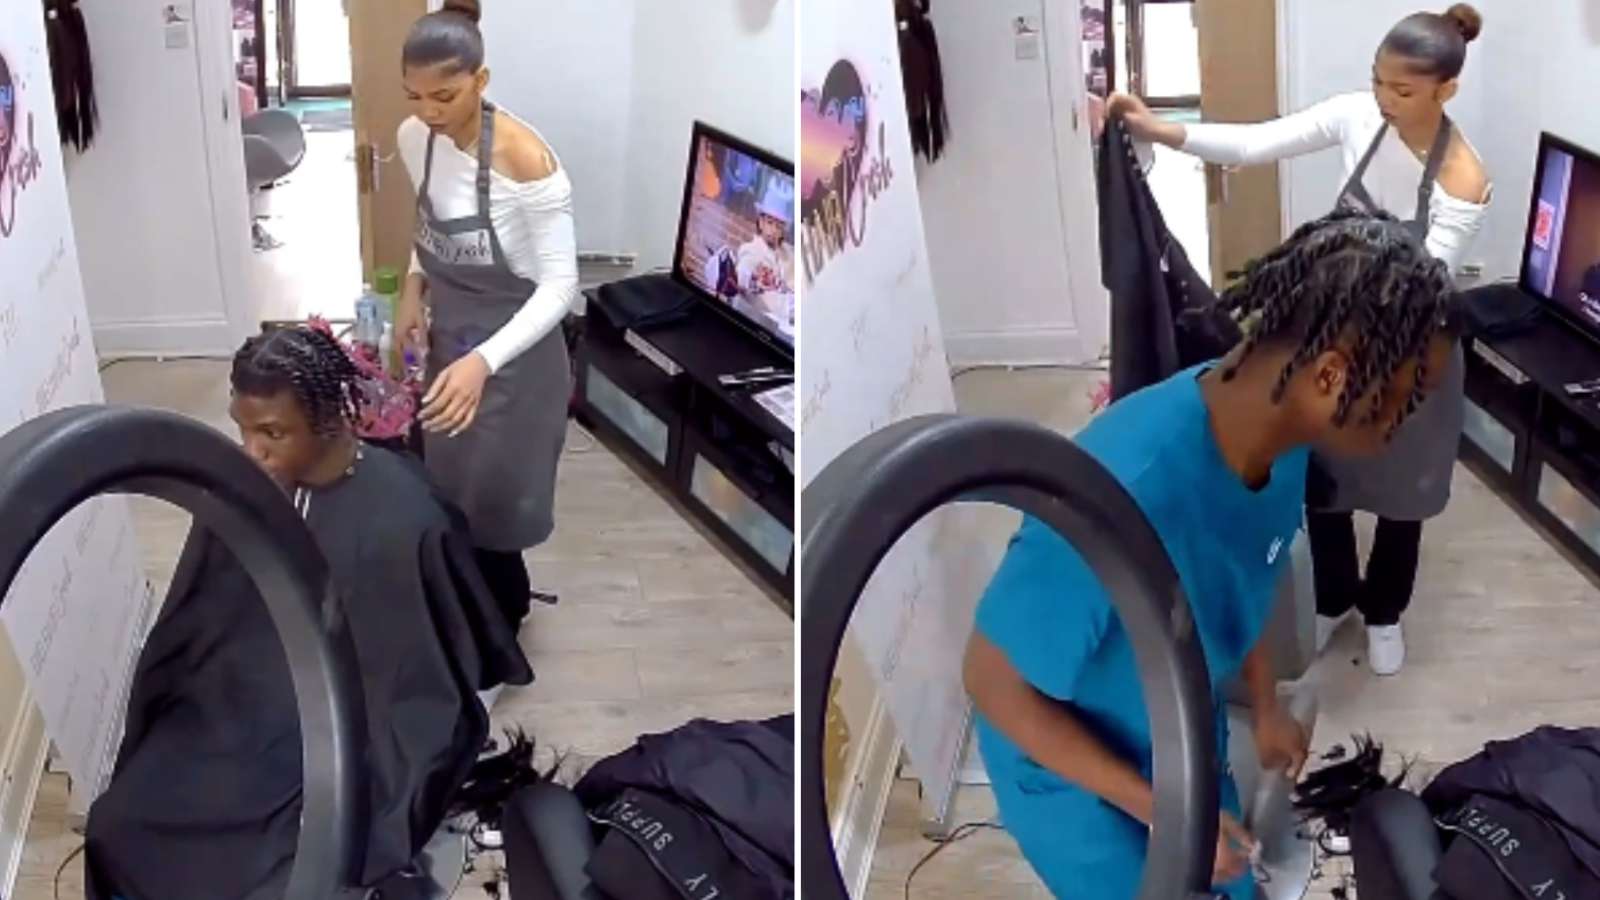 man runs out of salon without paying time wasting fee